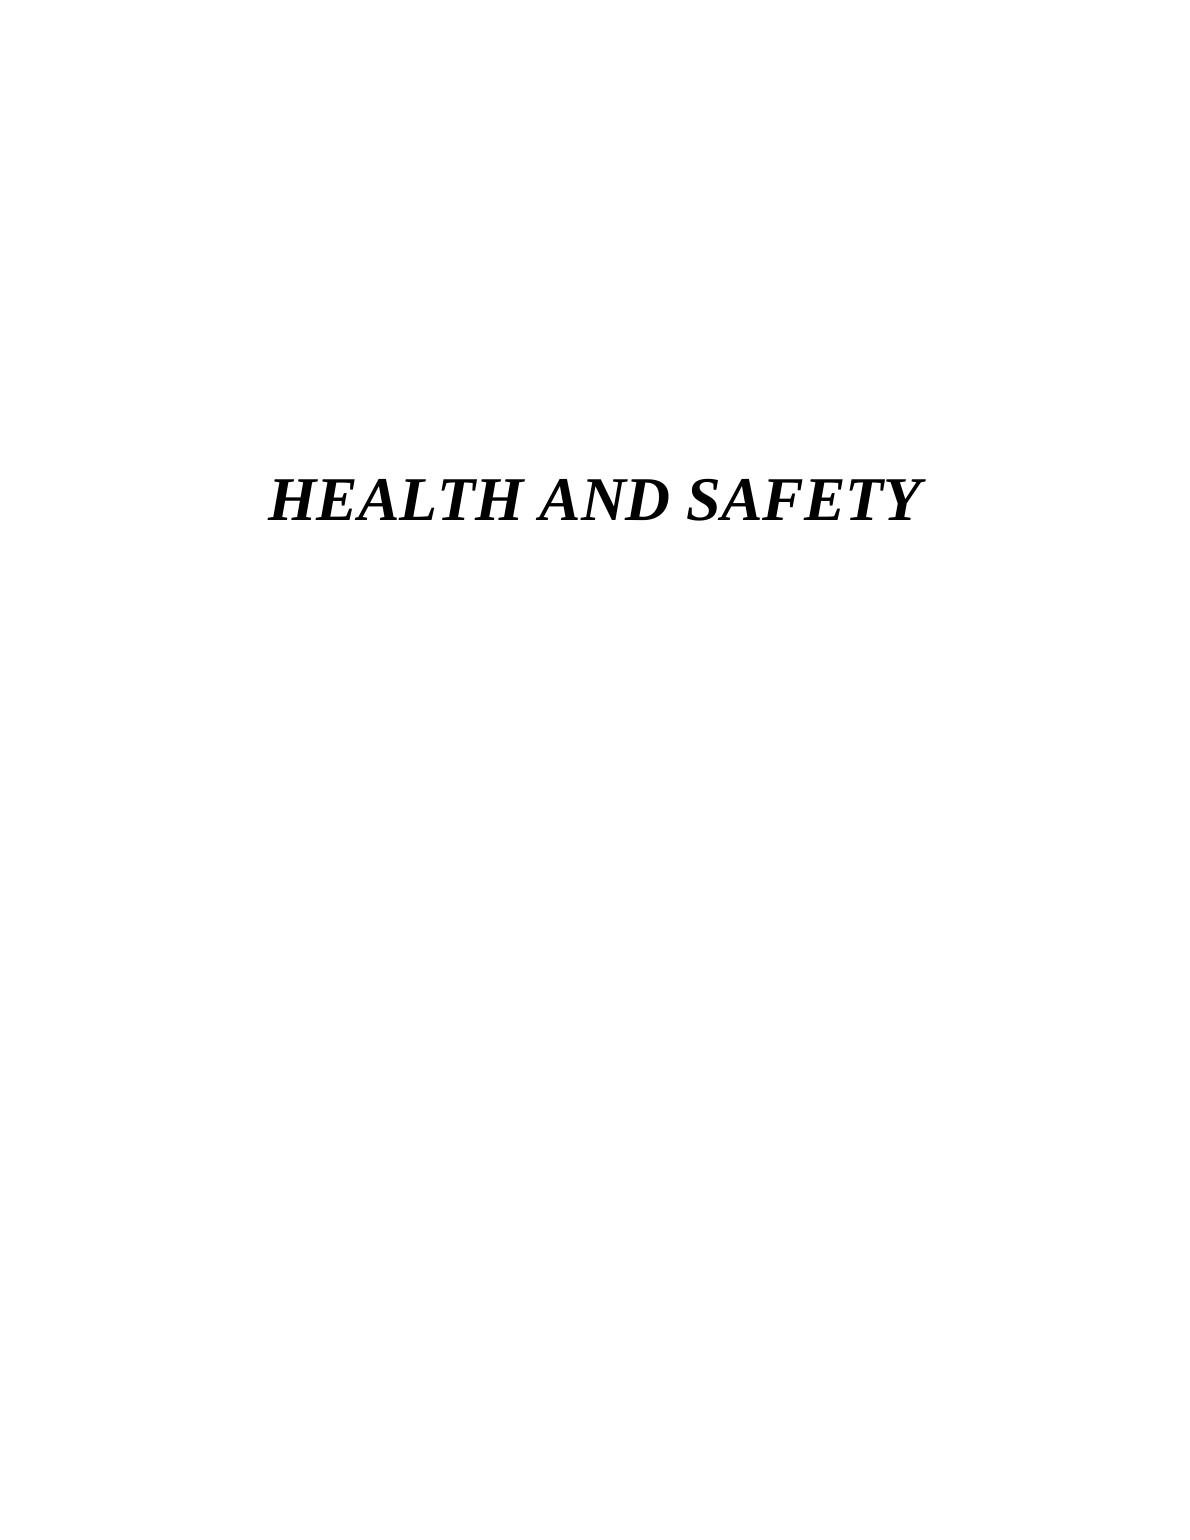 Health and safety at workplace: an introduction_1